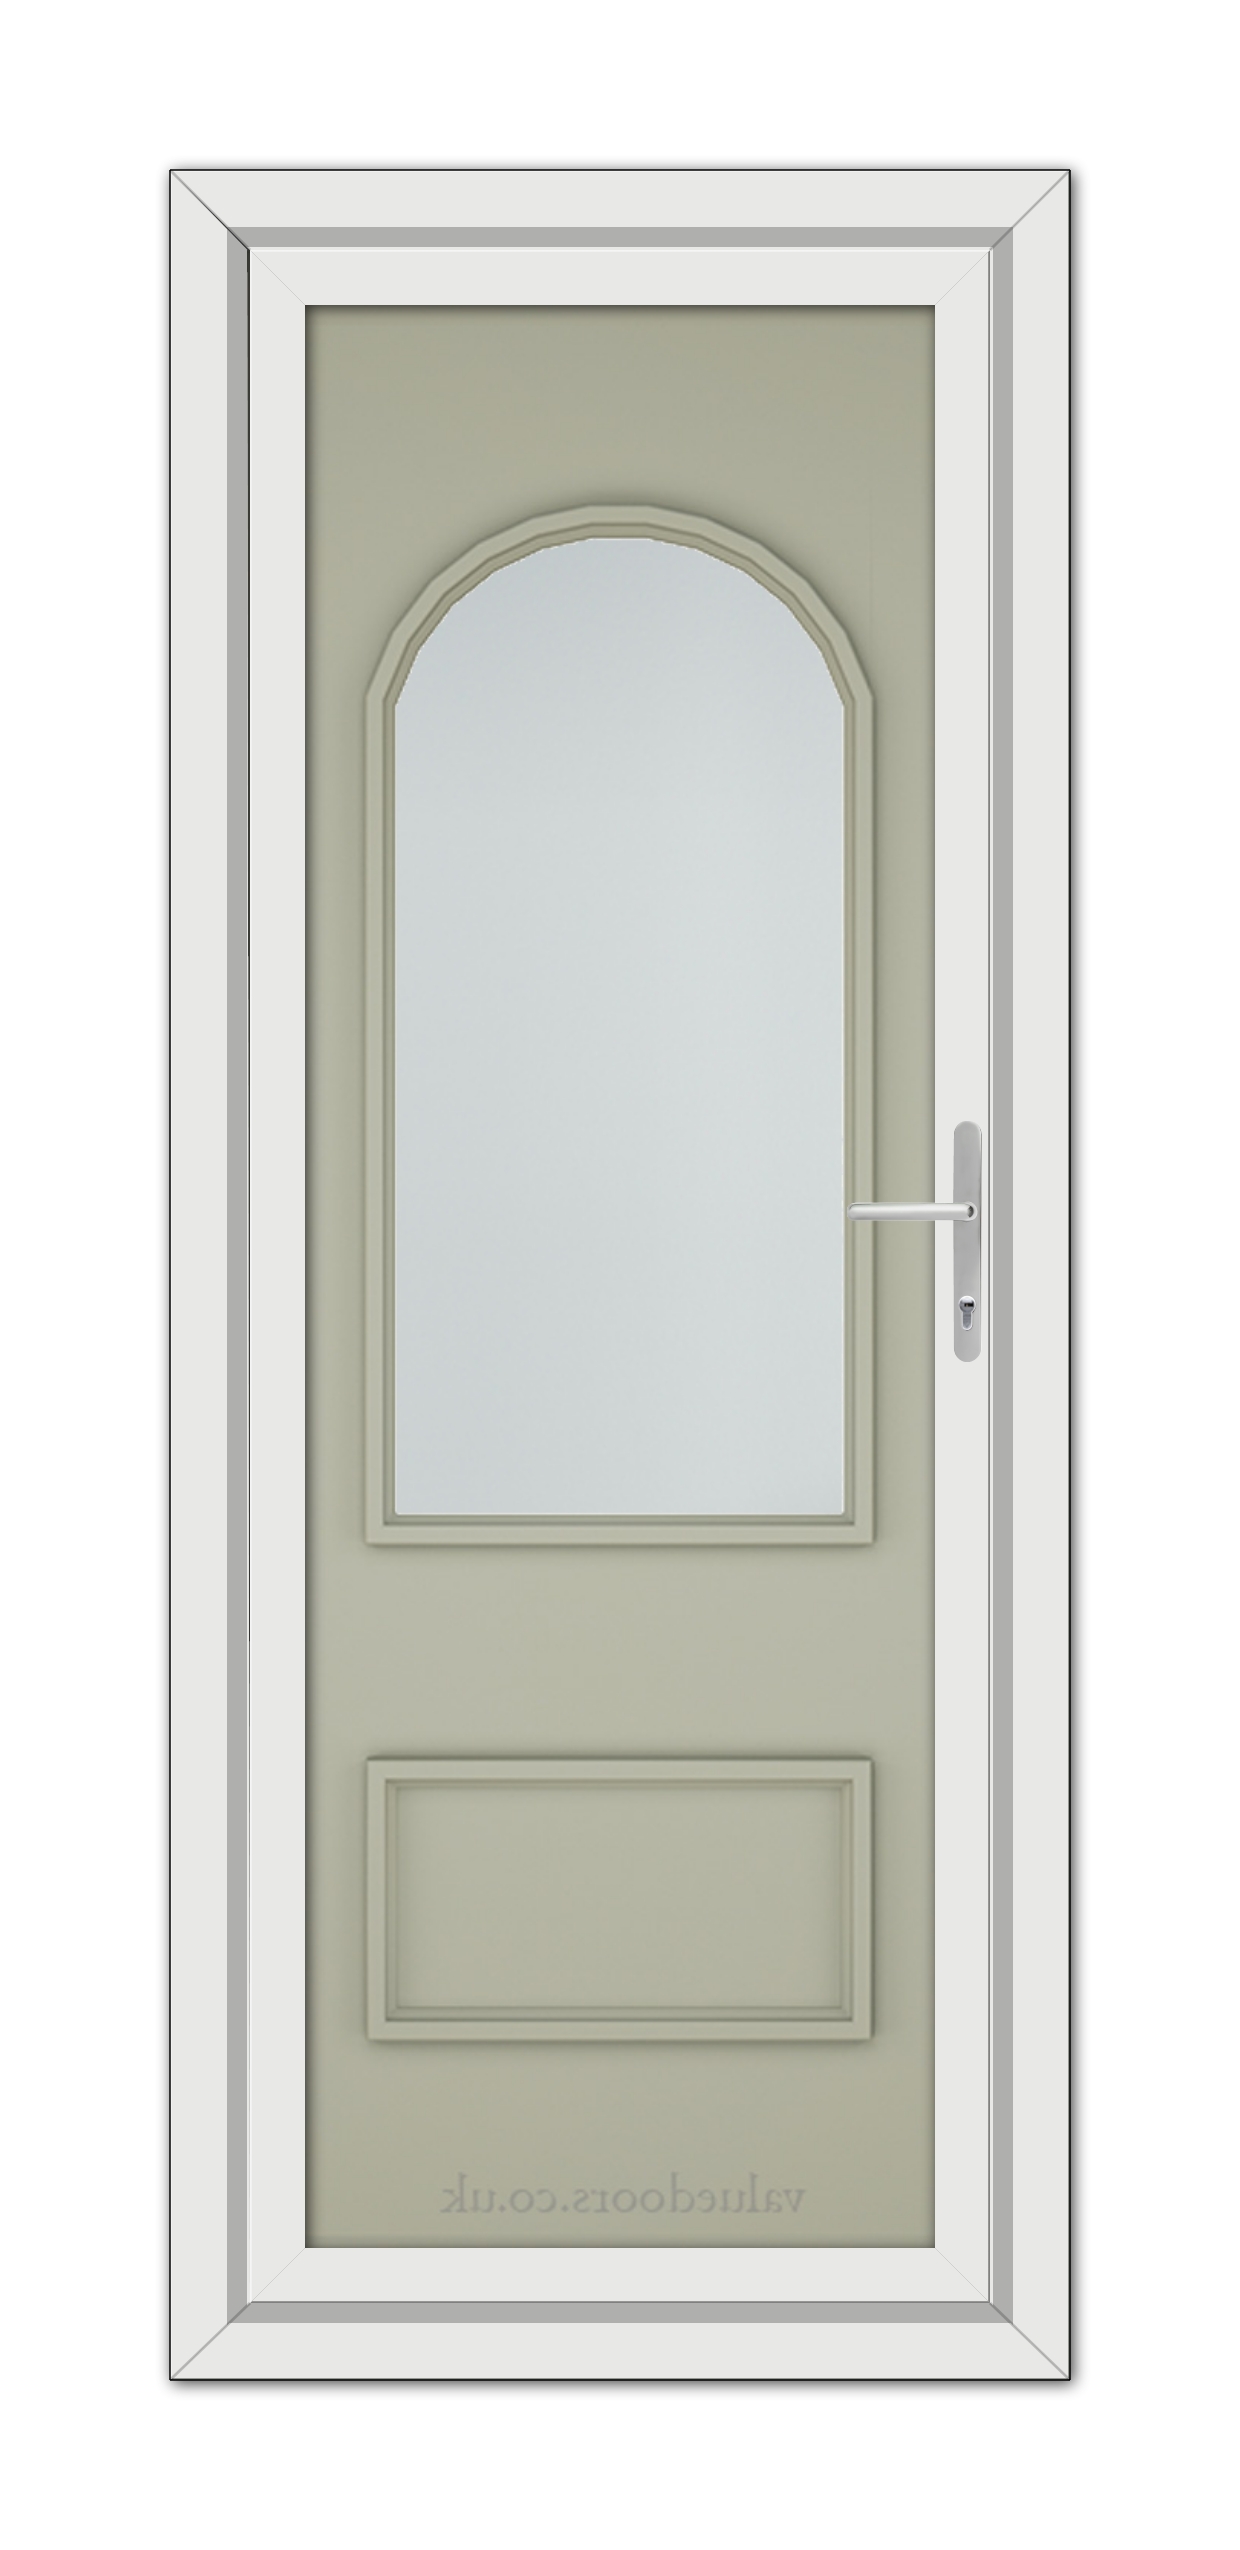 A vertical image of a modern, Agate Grey Rockingham uPVC door with an arched window at the top and a silver handle on the right.